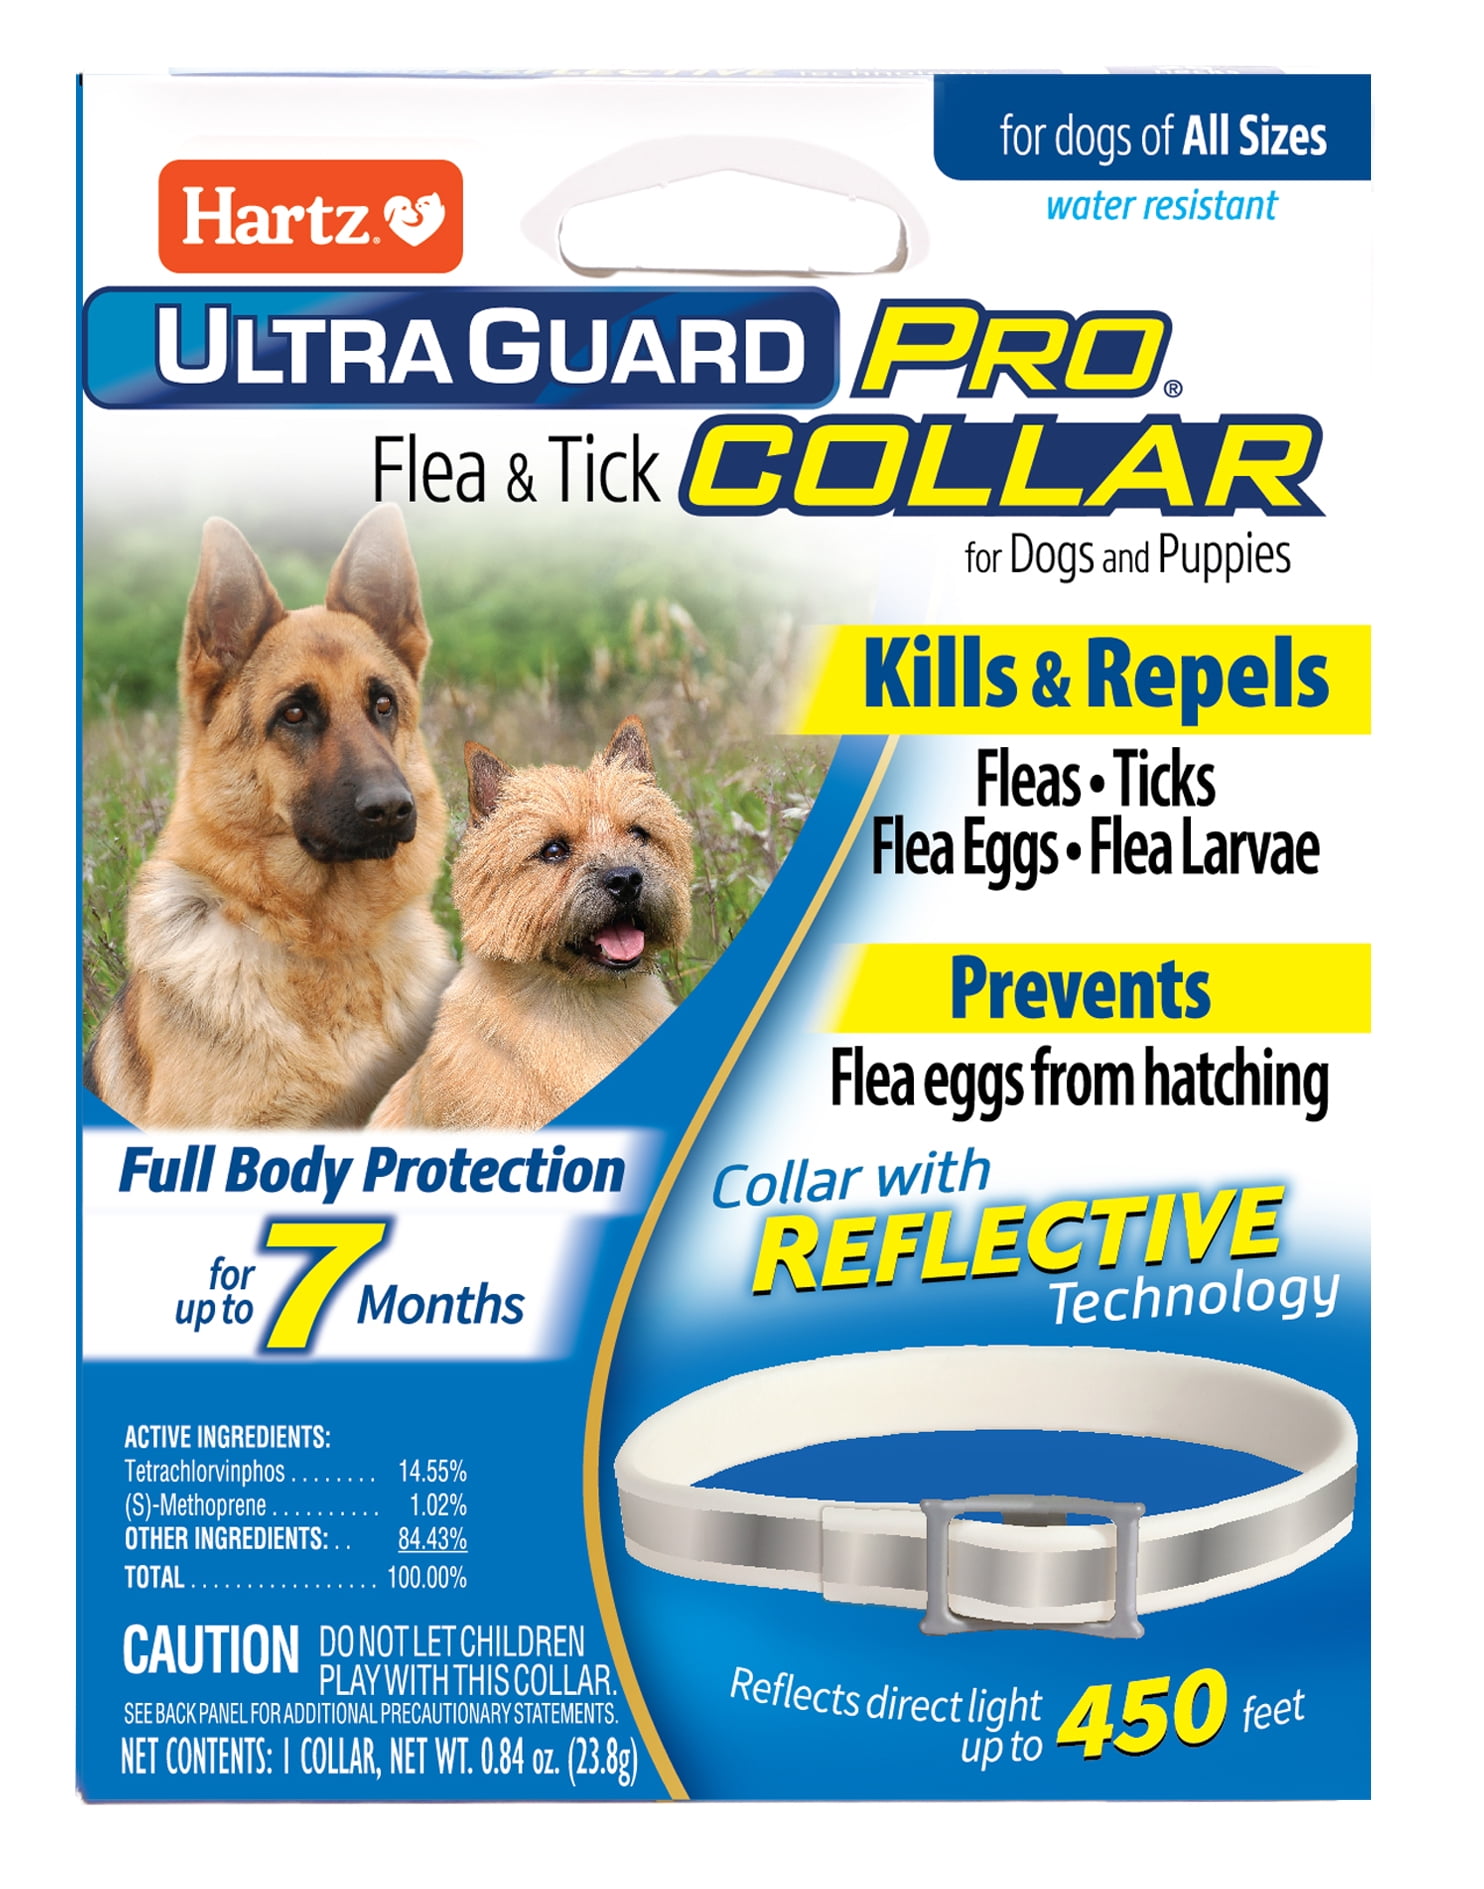 Flea and Tick Collar for Dogs,2 Pack,Natural Flea and Tick Prevention for Dogs,8 Months Protection,One Size Fits All Dogs,Adjustable & Waterproof,Include Flea Comb